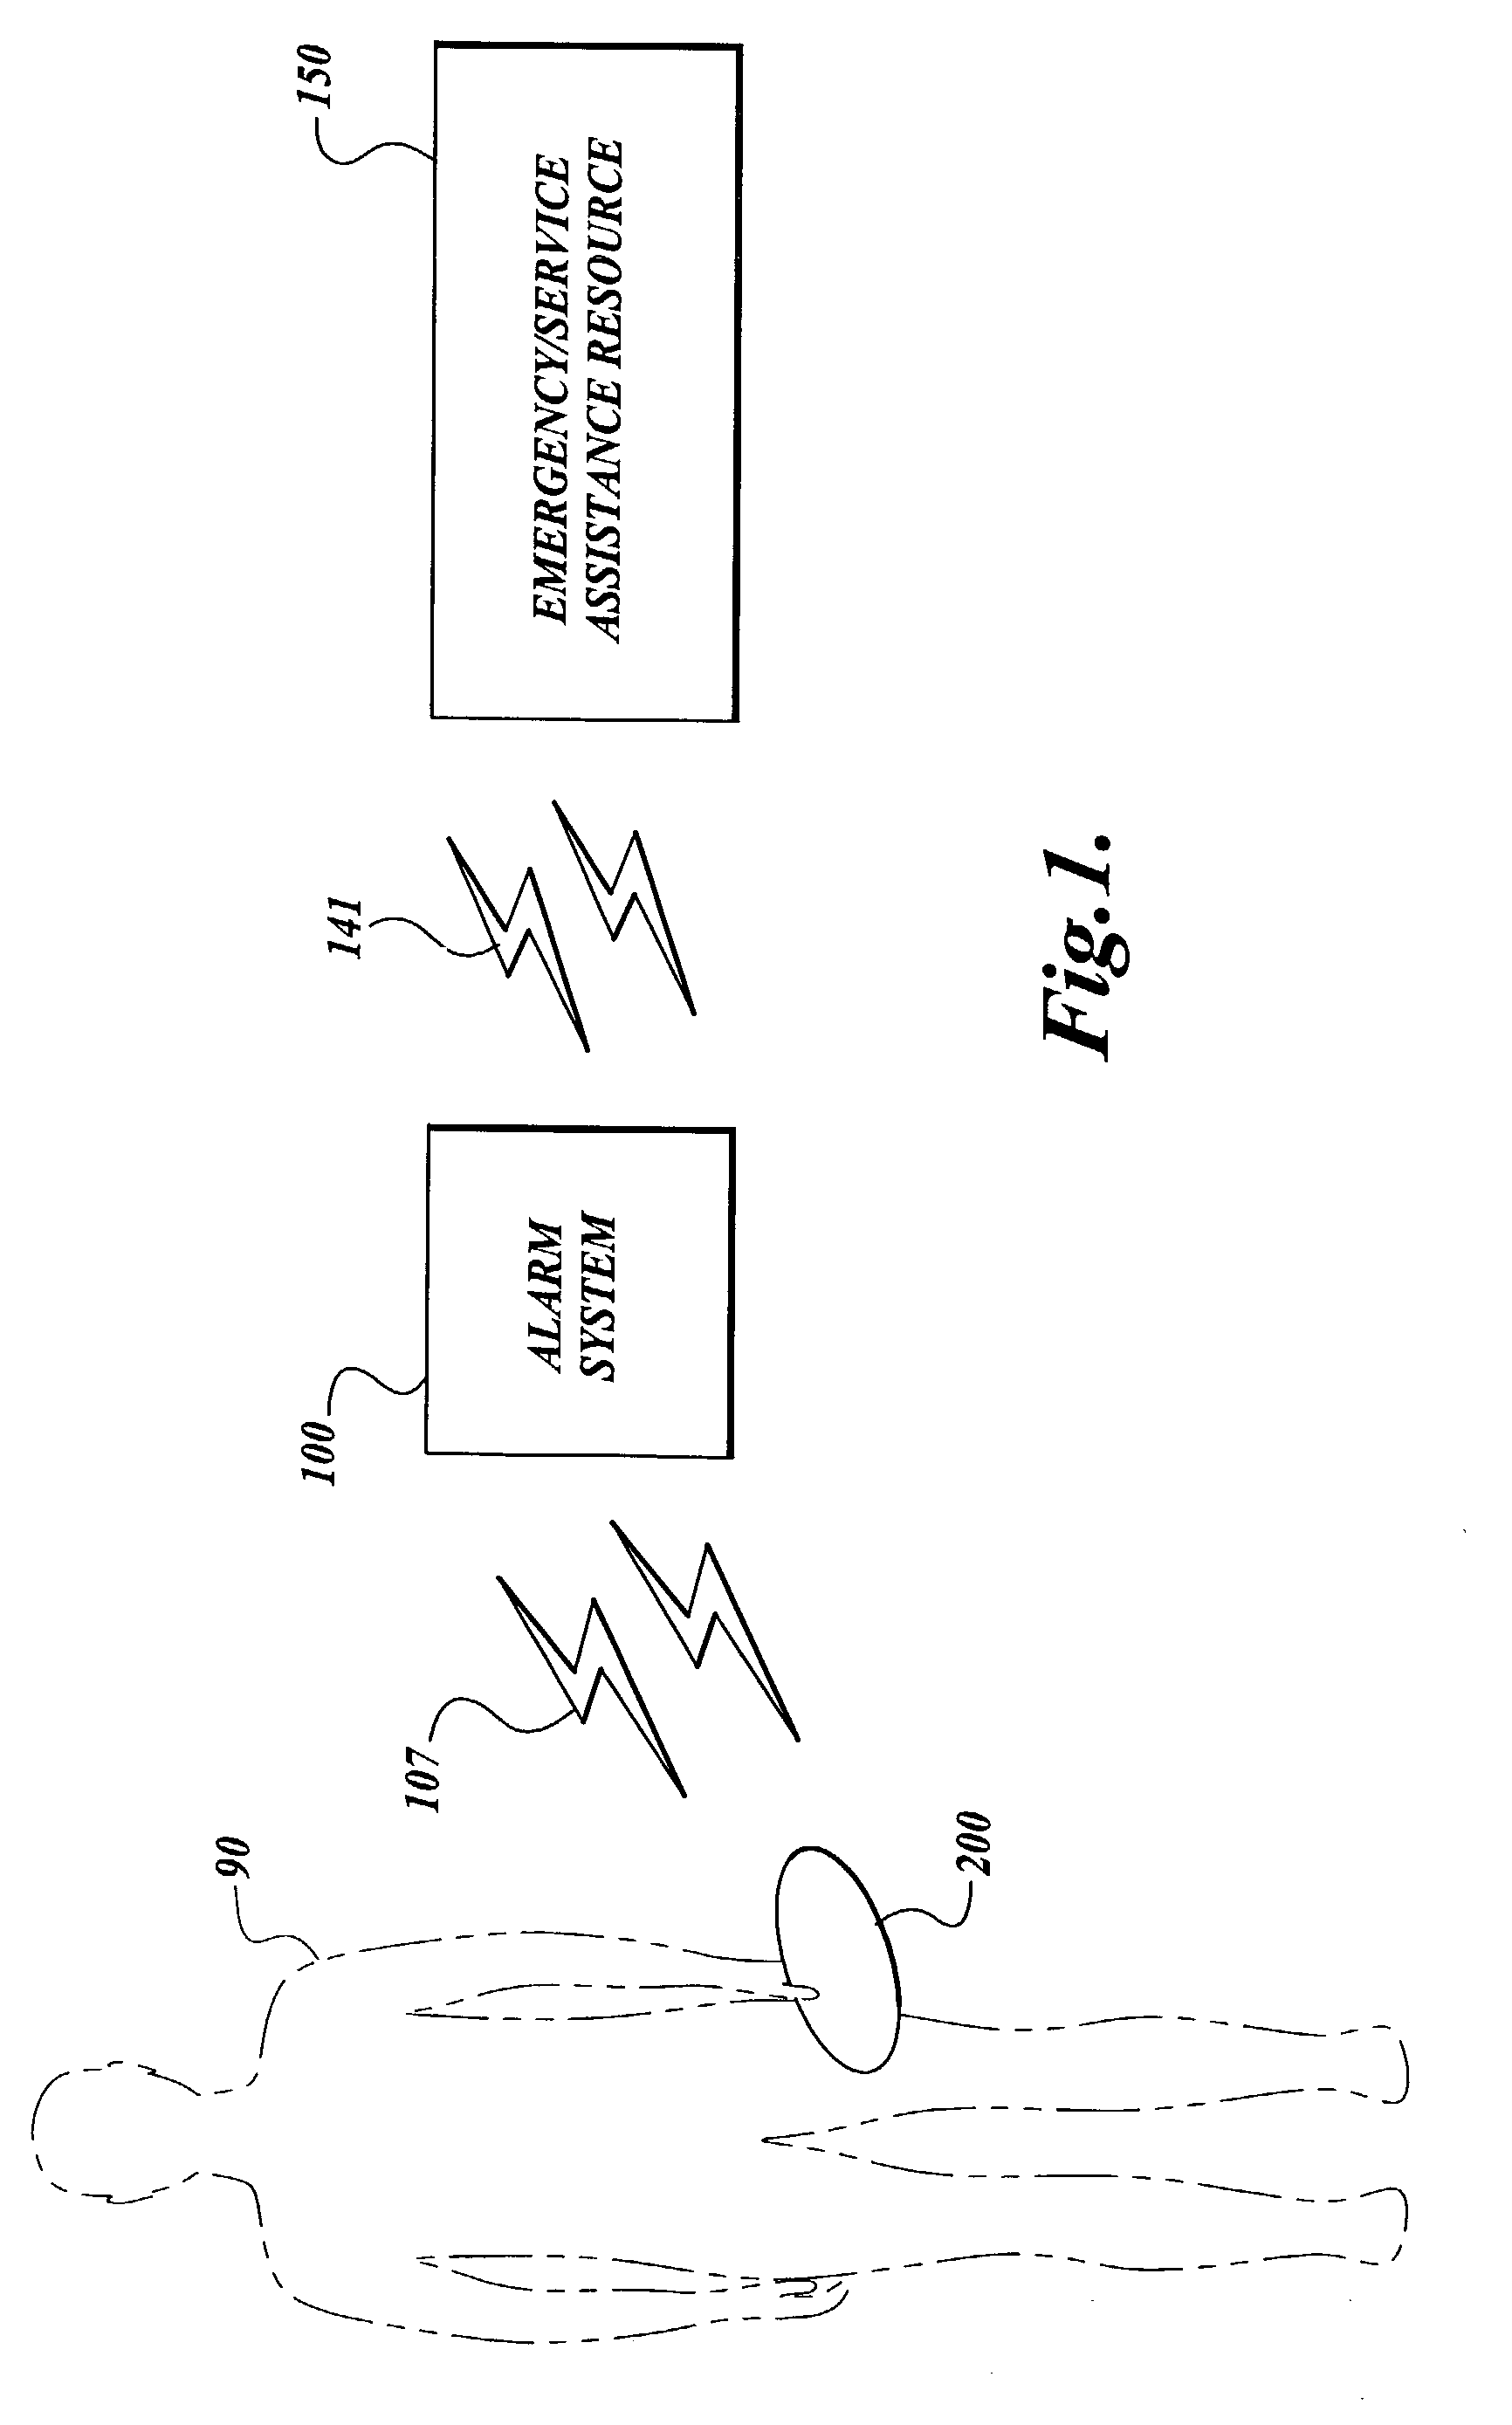 Therapy-delivering portable medical device capable of triggering and communicating with an alarm system